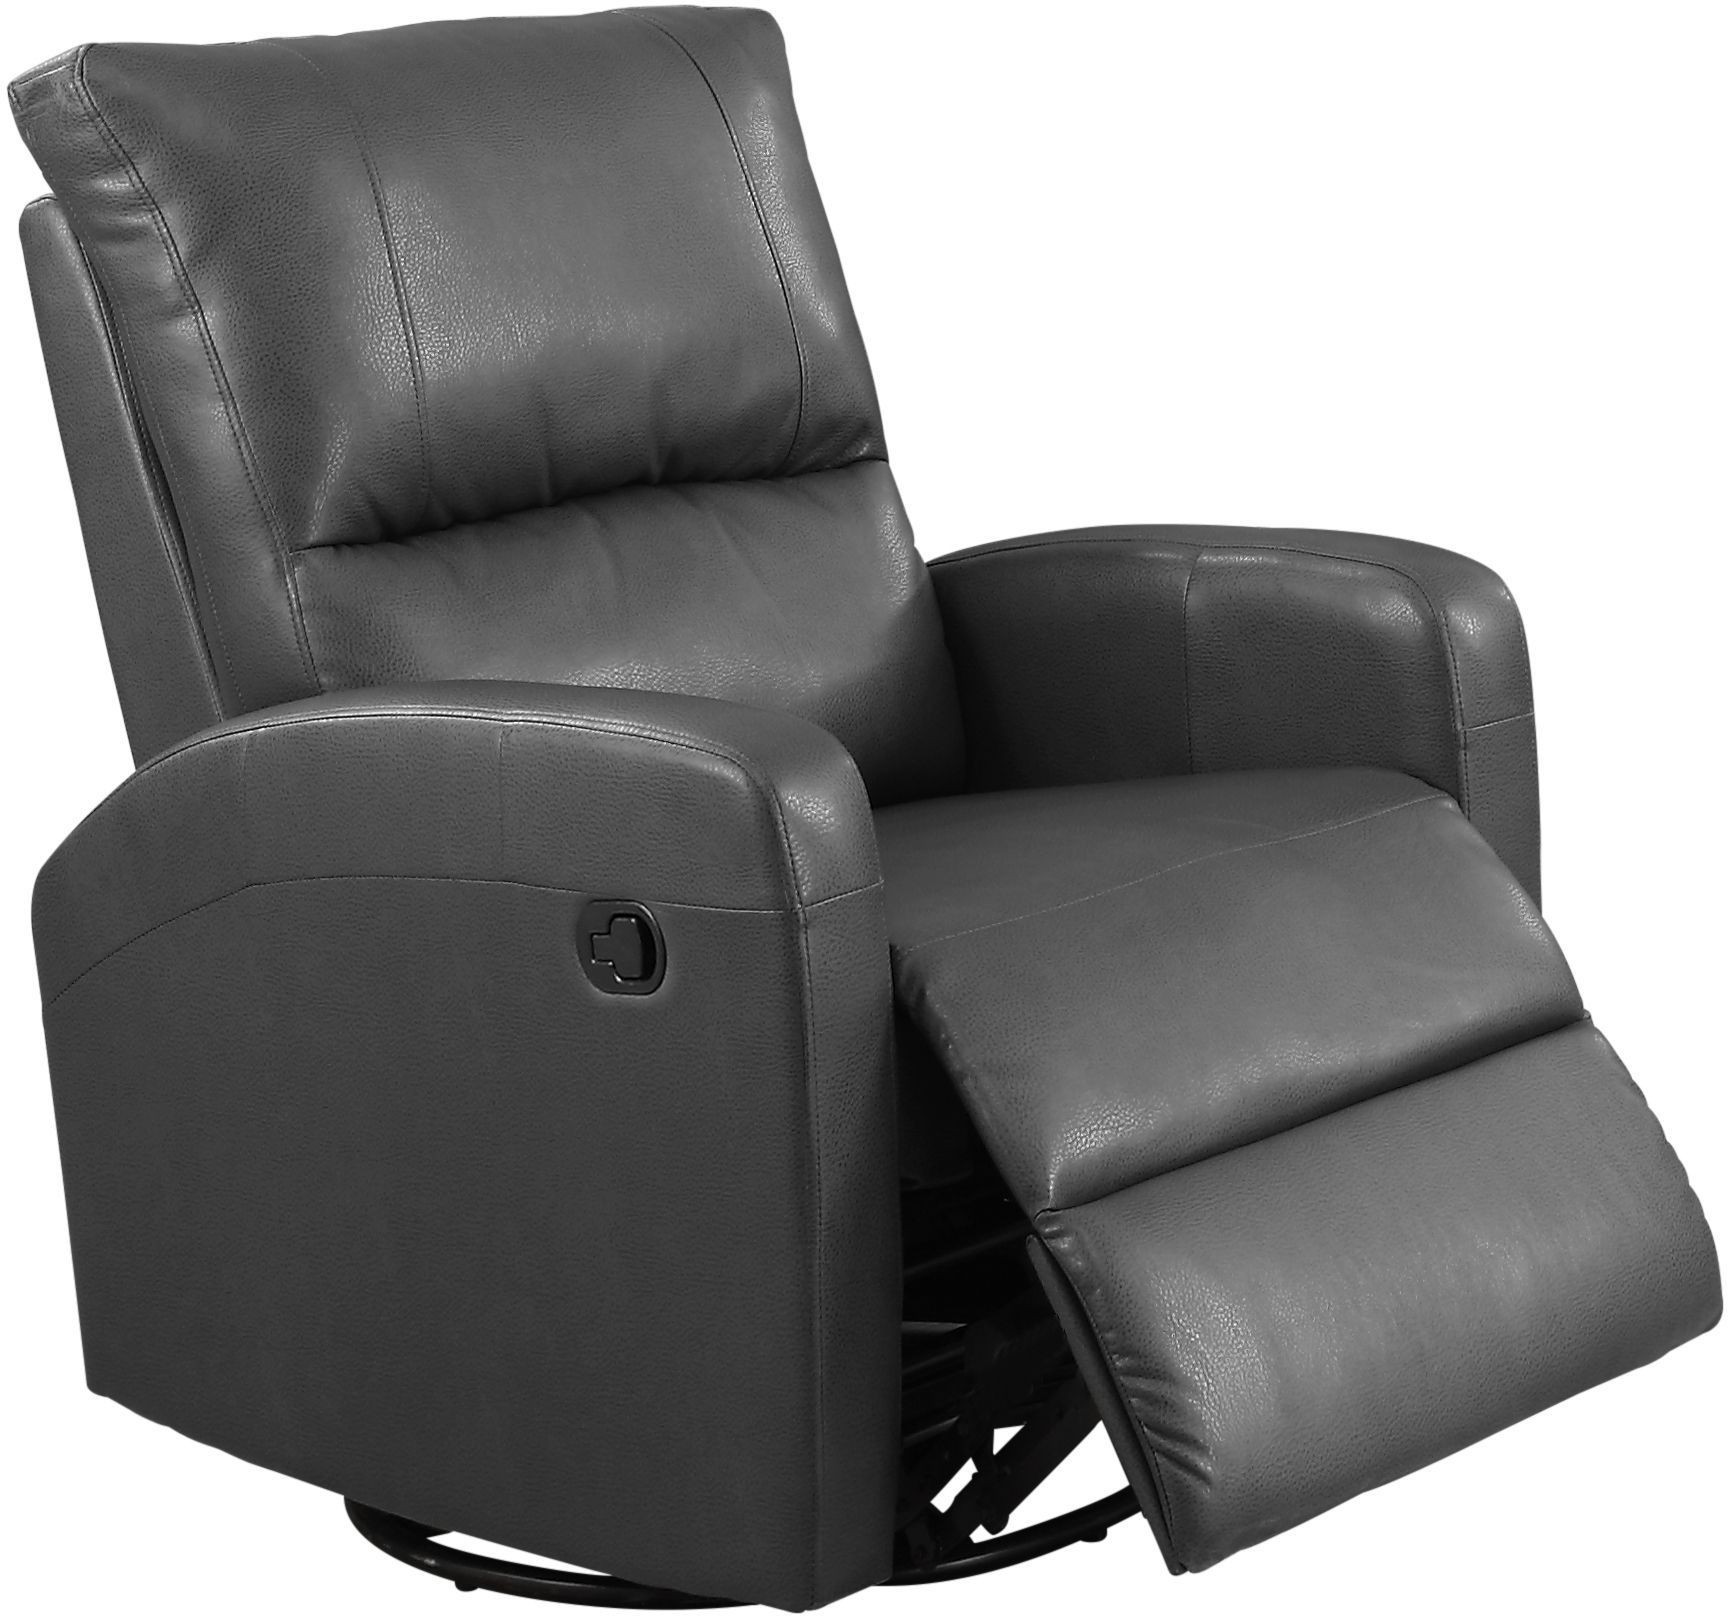 8084gy charcoal gray bonded leather swivel glider recliner